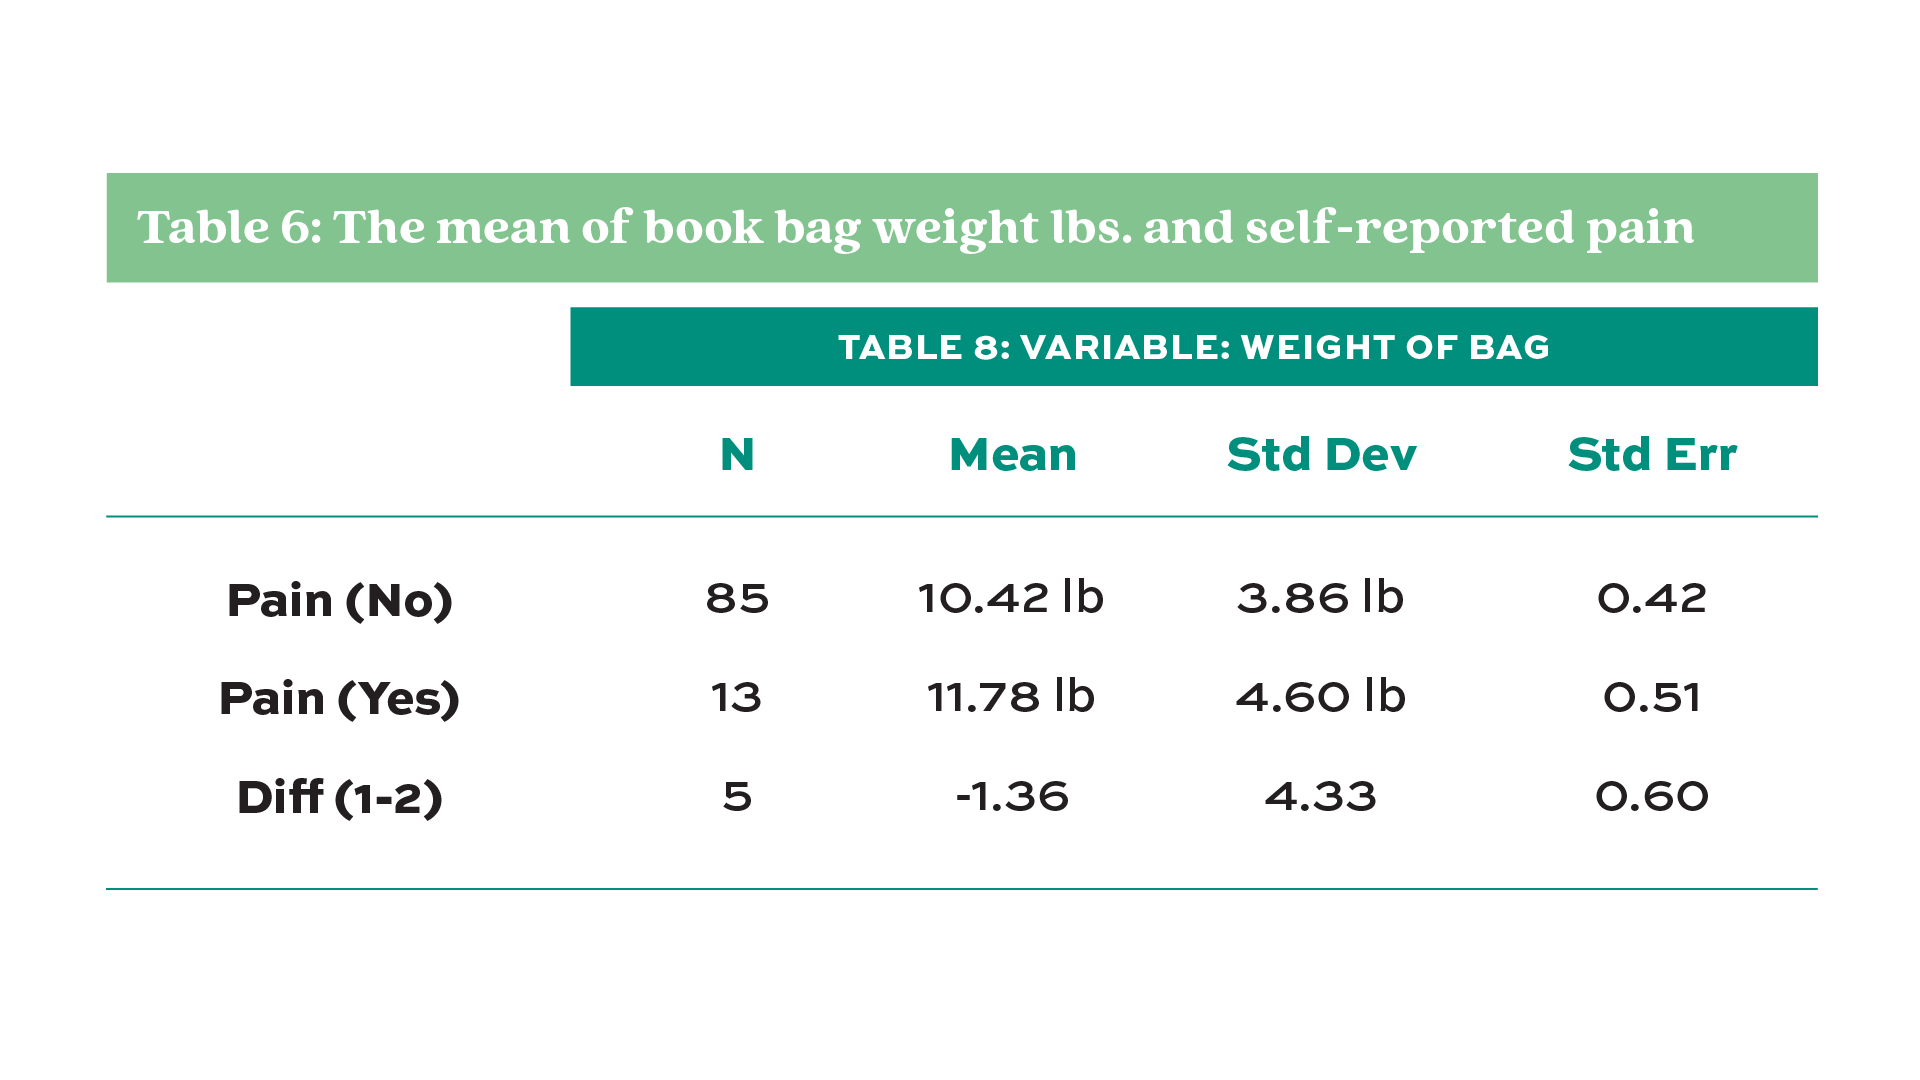 Table 6. The mean of book bag weight lbs. and self-reported pain